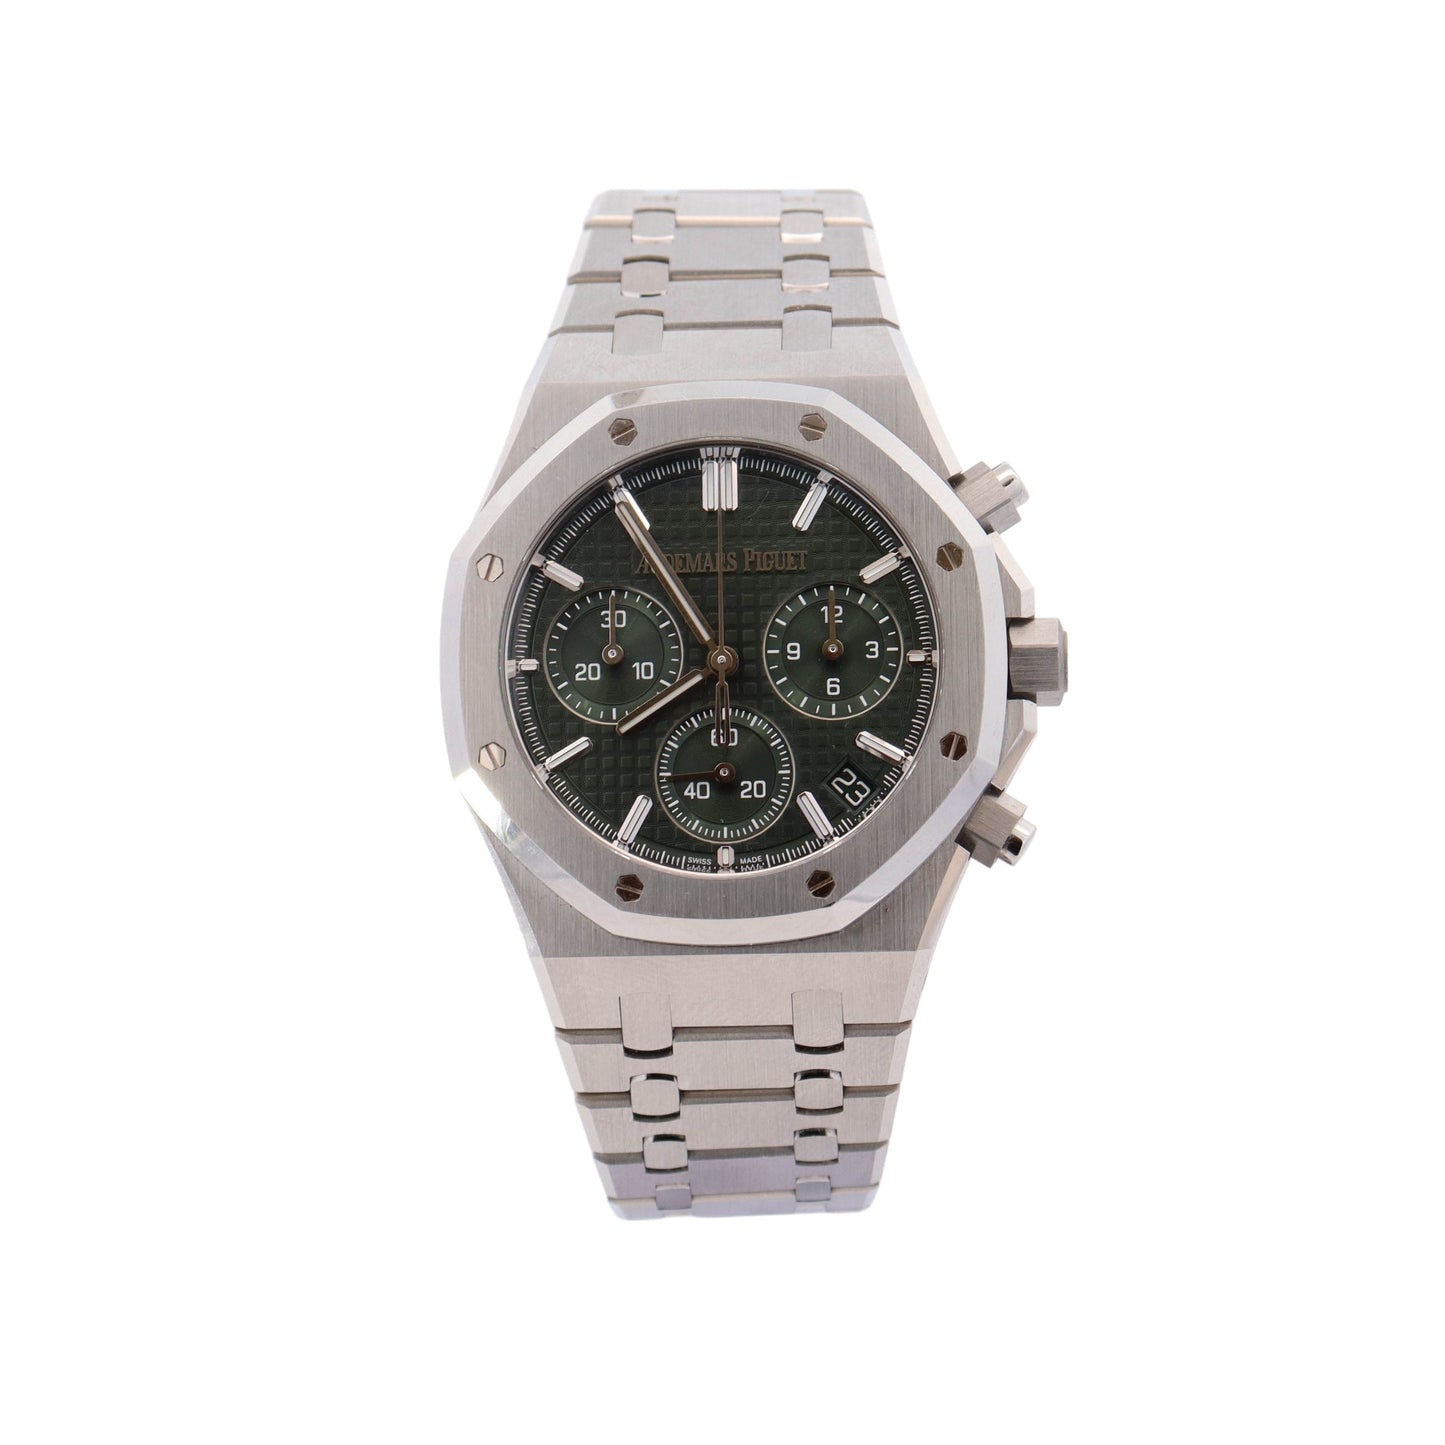 Audemars Piguet Royal Oak 41mm Stainless Steel Green Chronograph Dial Watch  Reference #:  26240ST.OO.1320ST.08 - Happy Jewelers Fine Jewelry Lifetime Warranty